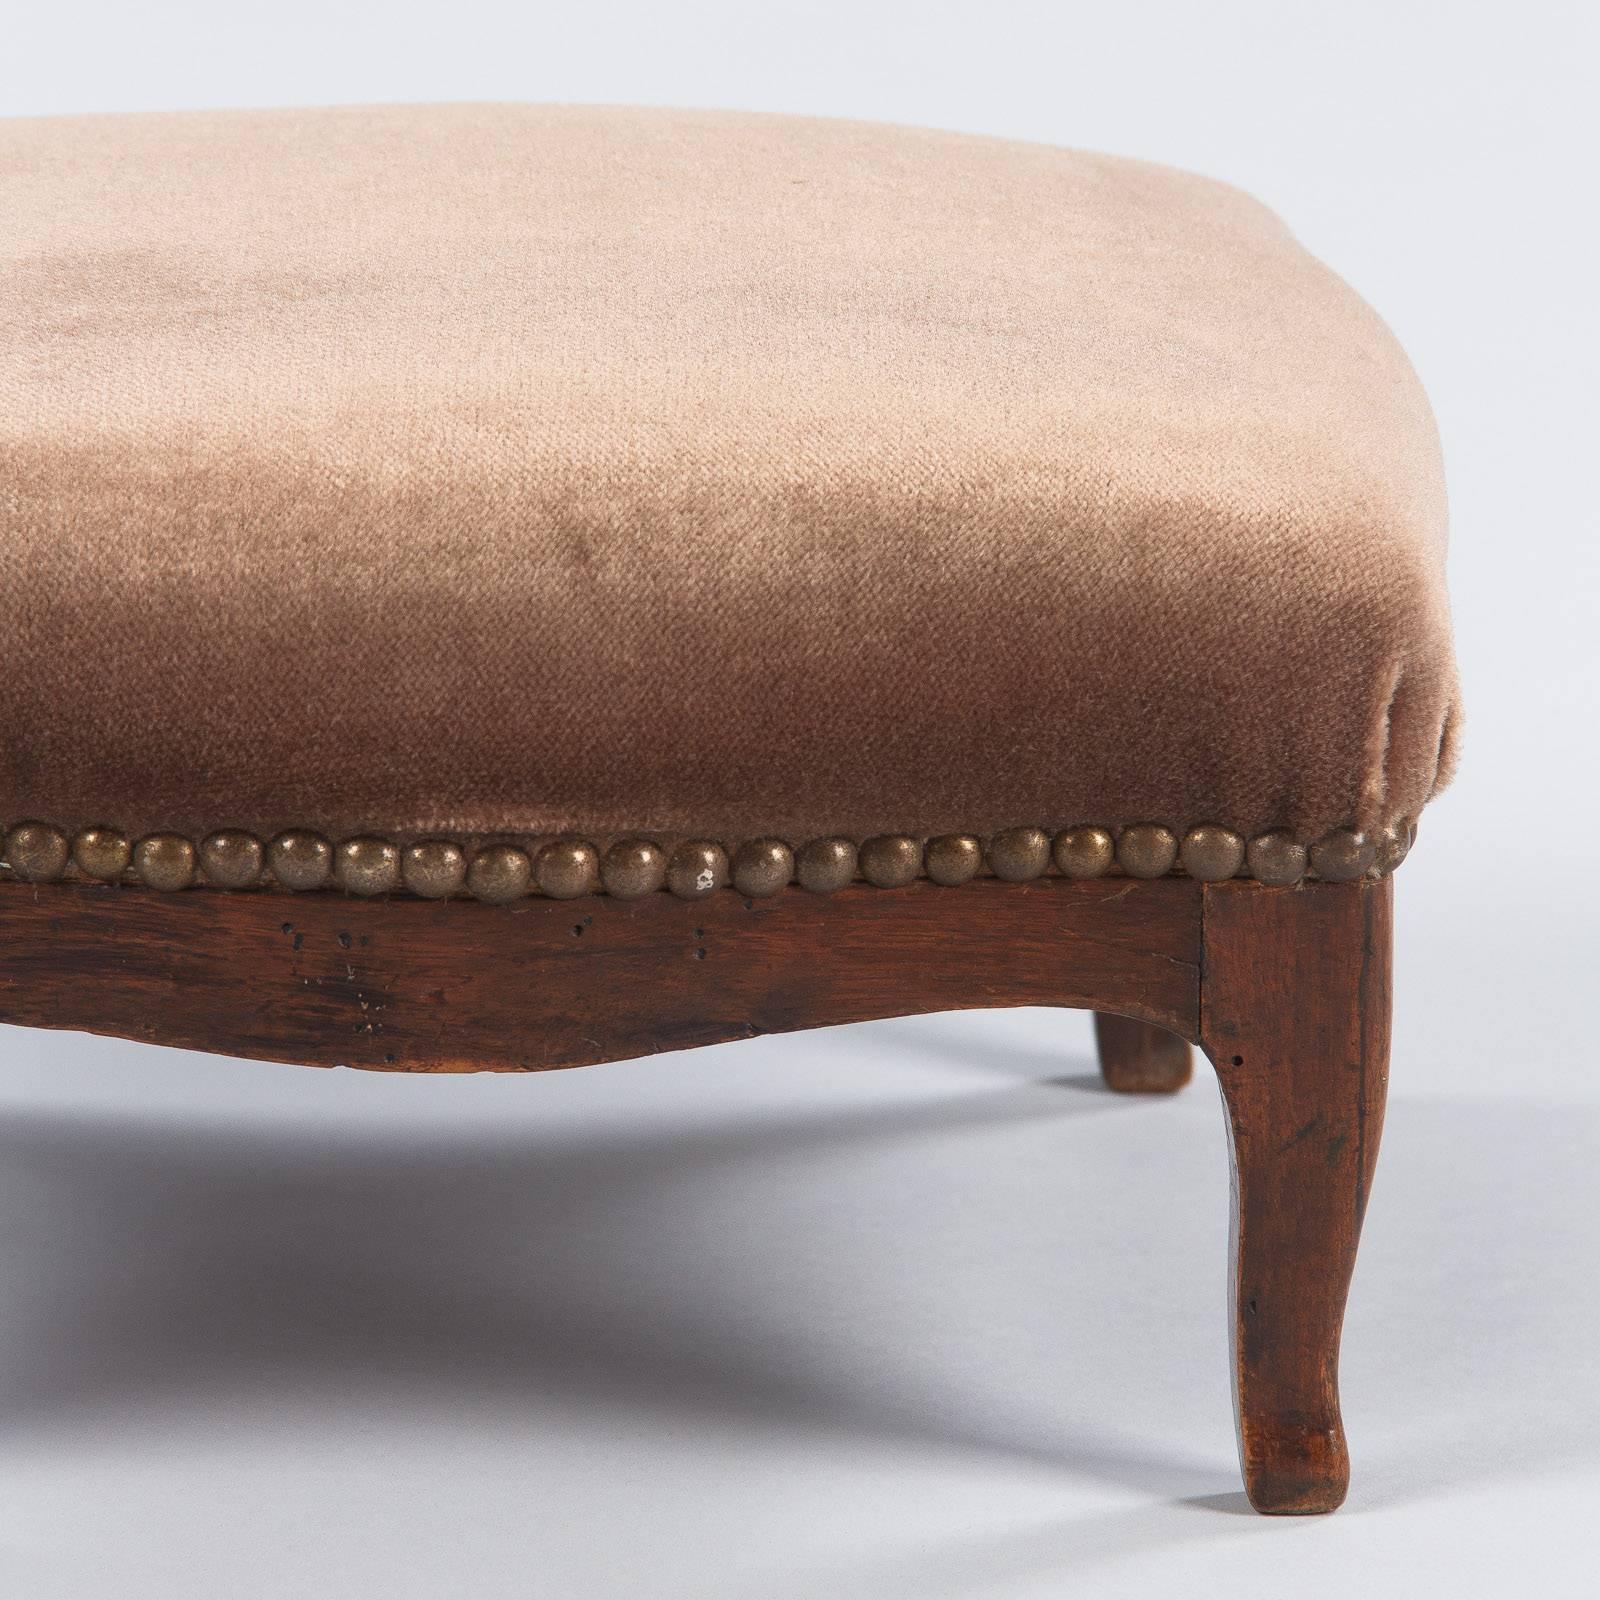 20th Century Louis Philippe Style Walnut Foot Stool, Early 1900s